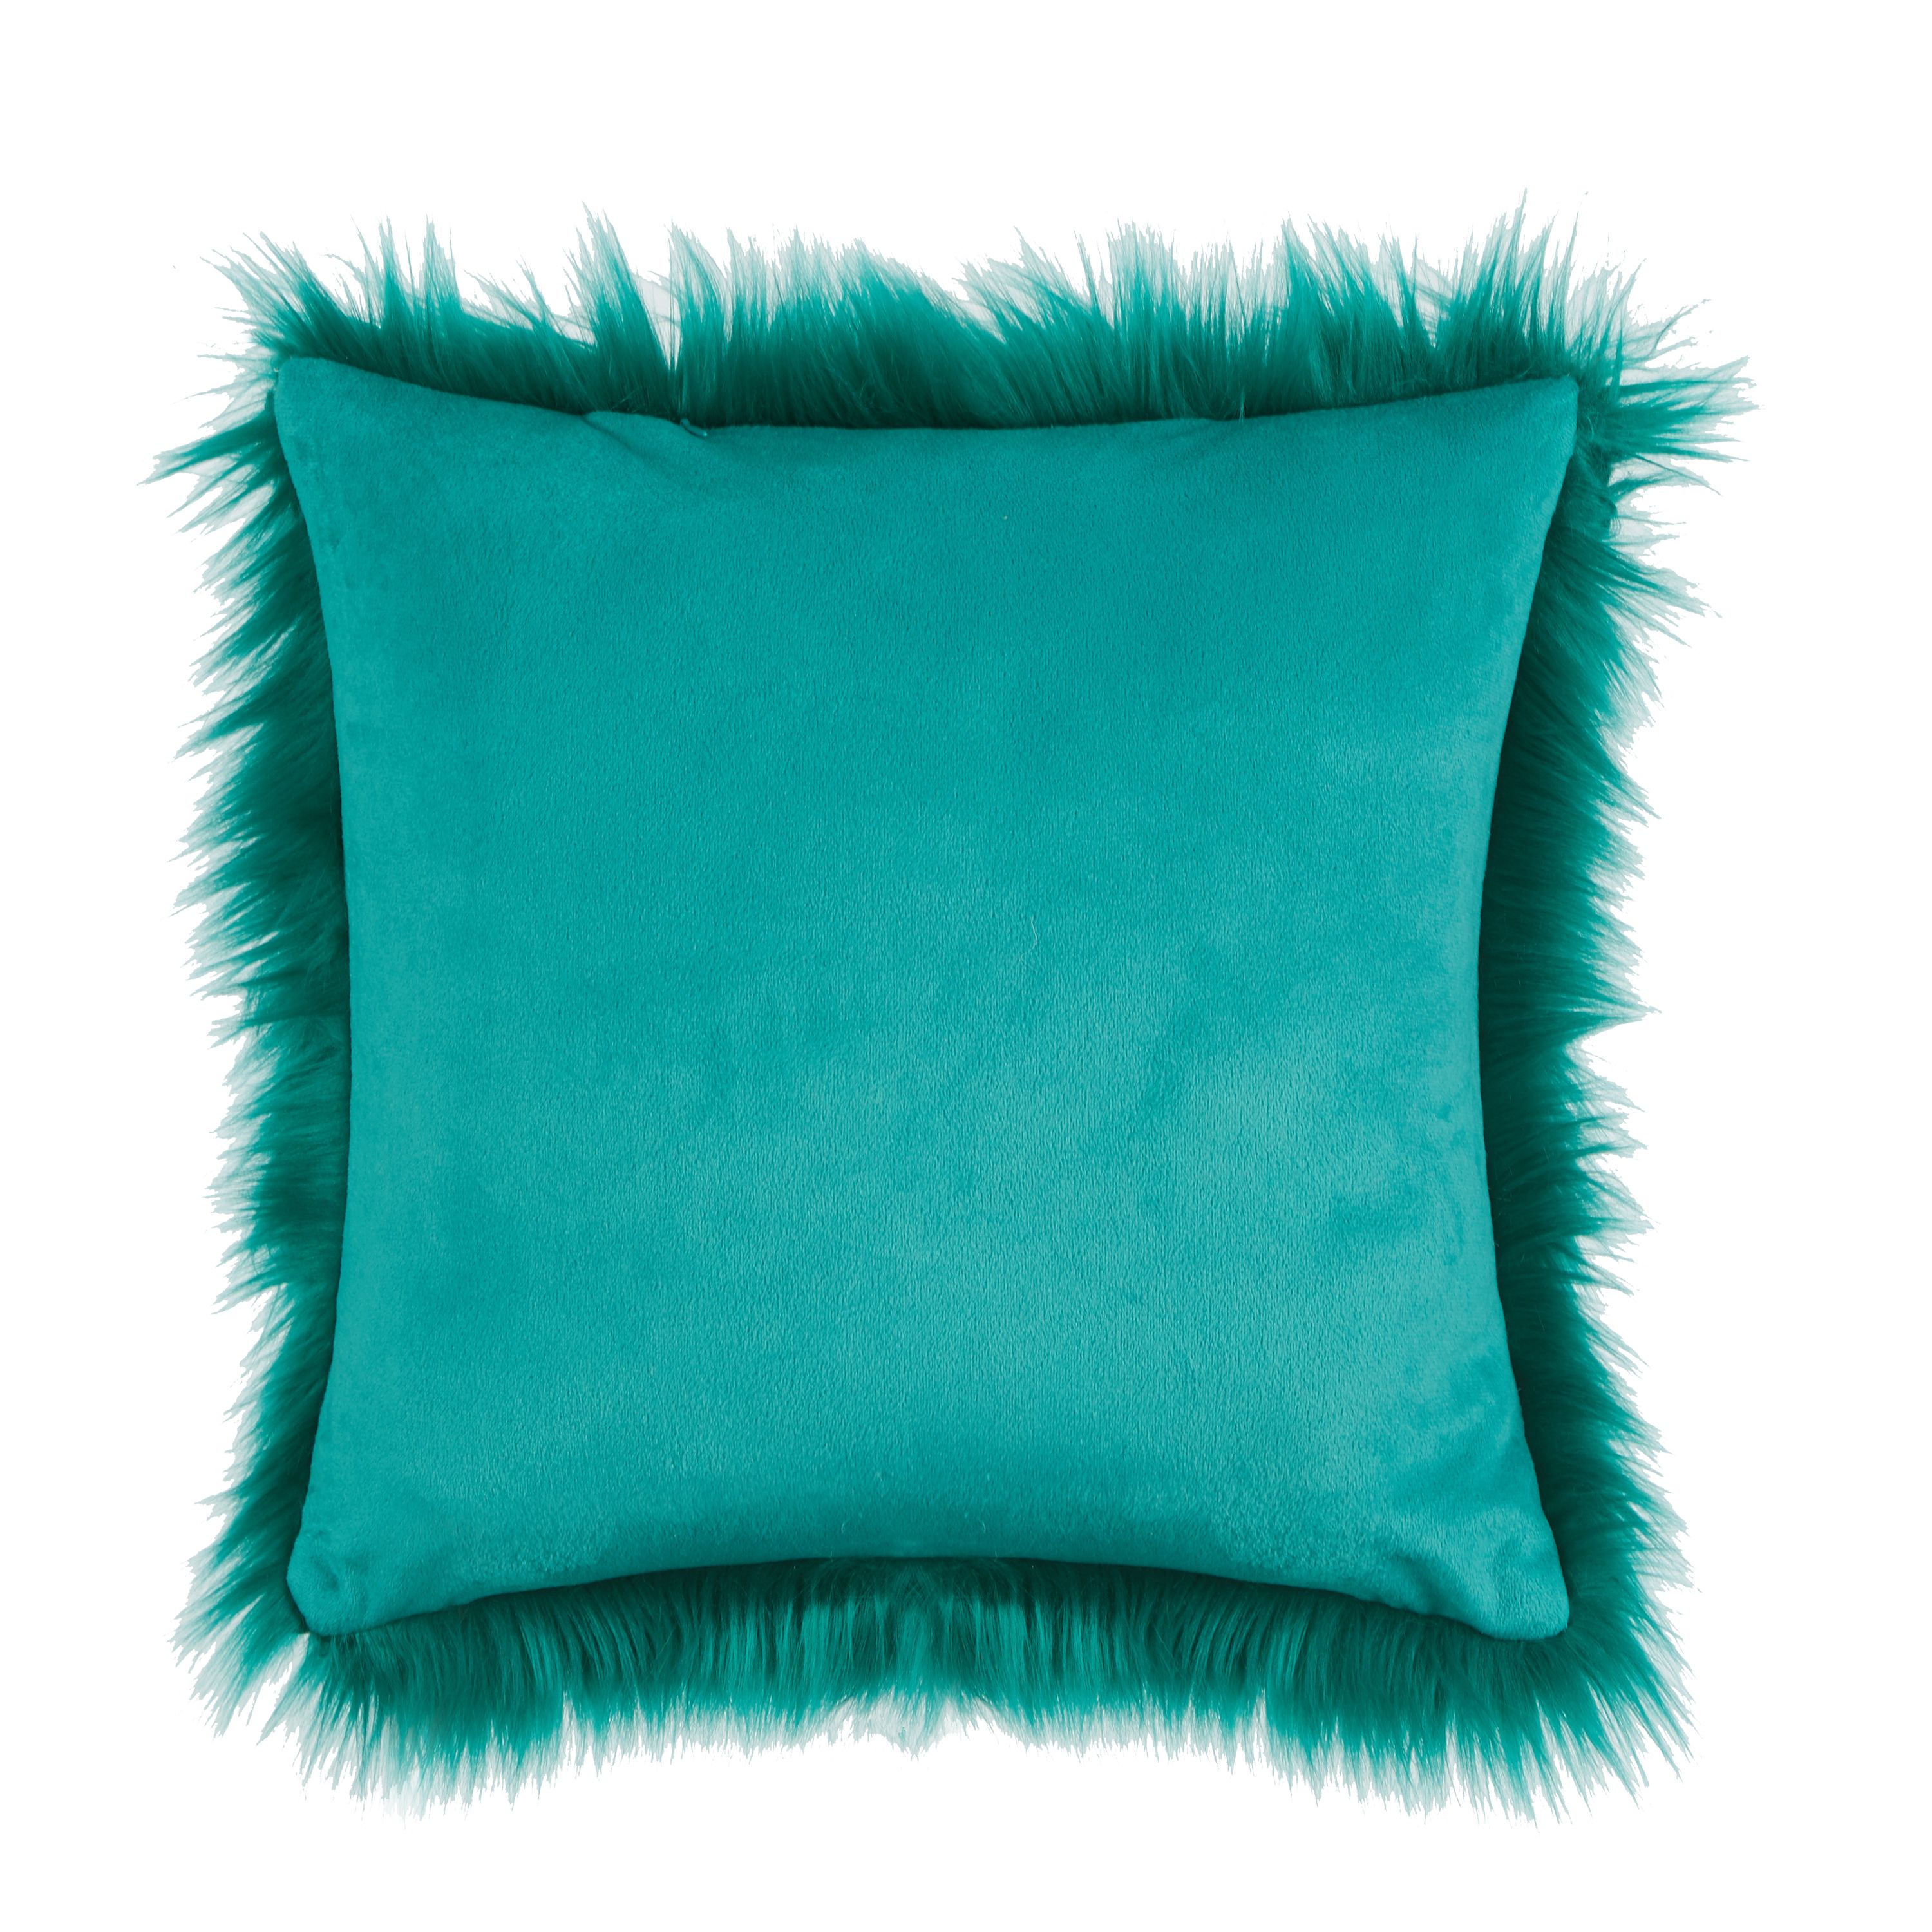 Your Zone Mainstays Flokati Decorative Throw Pillow 16" x 16", Green - image 3 of 3